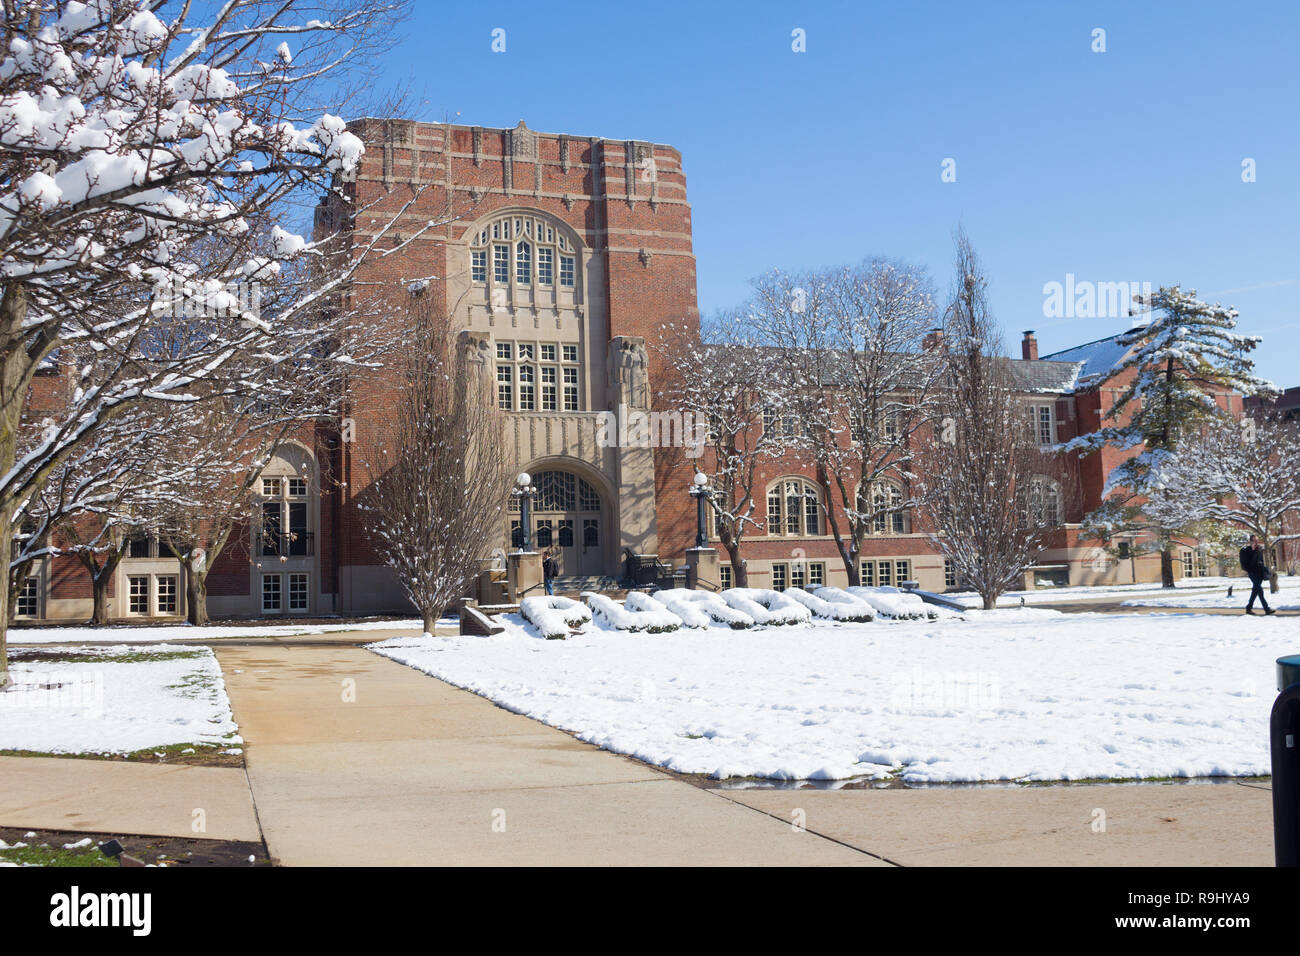 Purdue Memorial Union with snow, Purdue University, West Lafayette, Indiana, United States Stock Photo